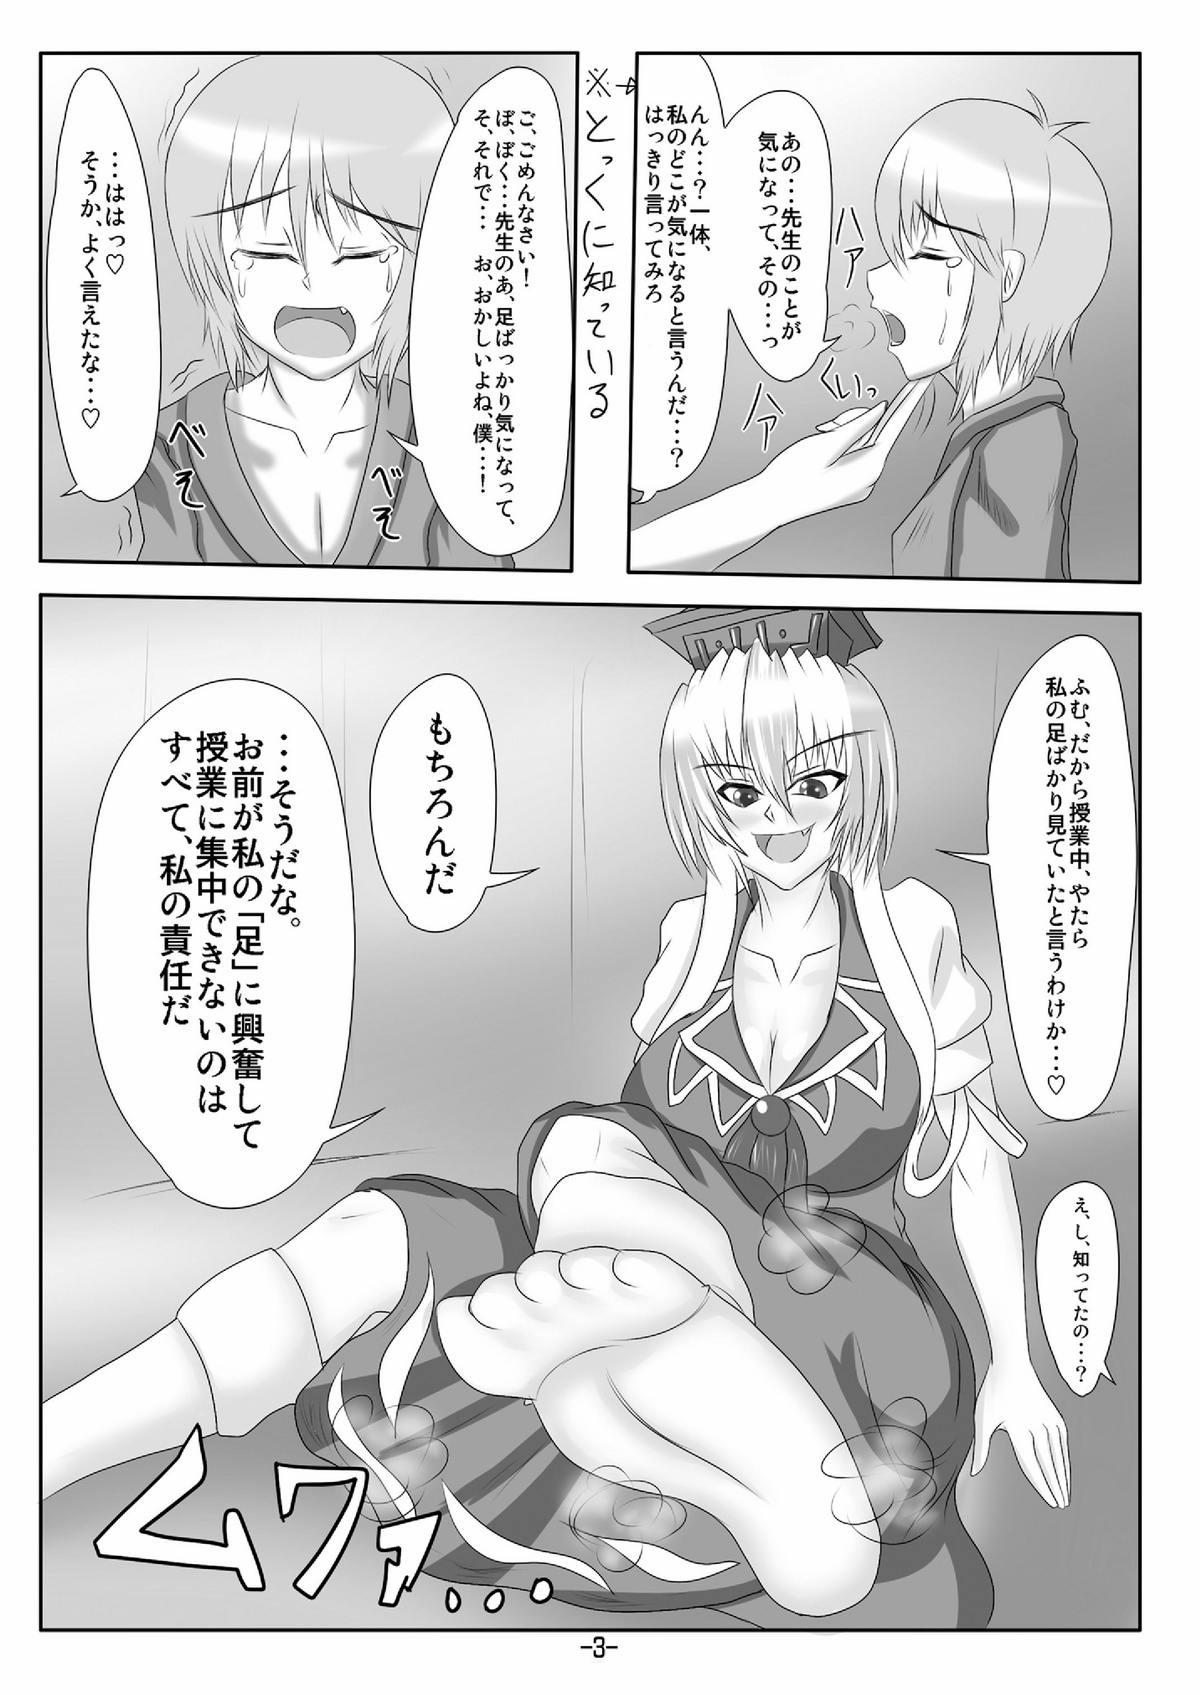 Shorts Blue Dominator - Touhou project Blowjob - Page 5